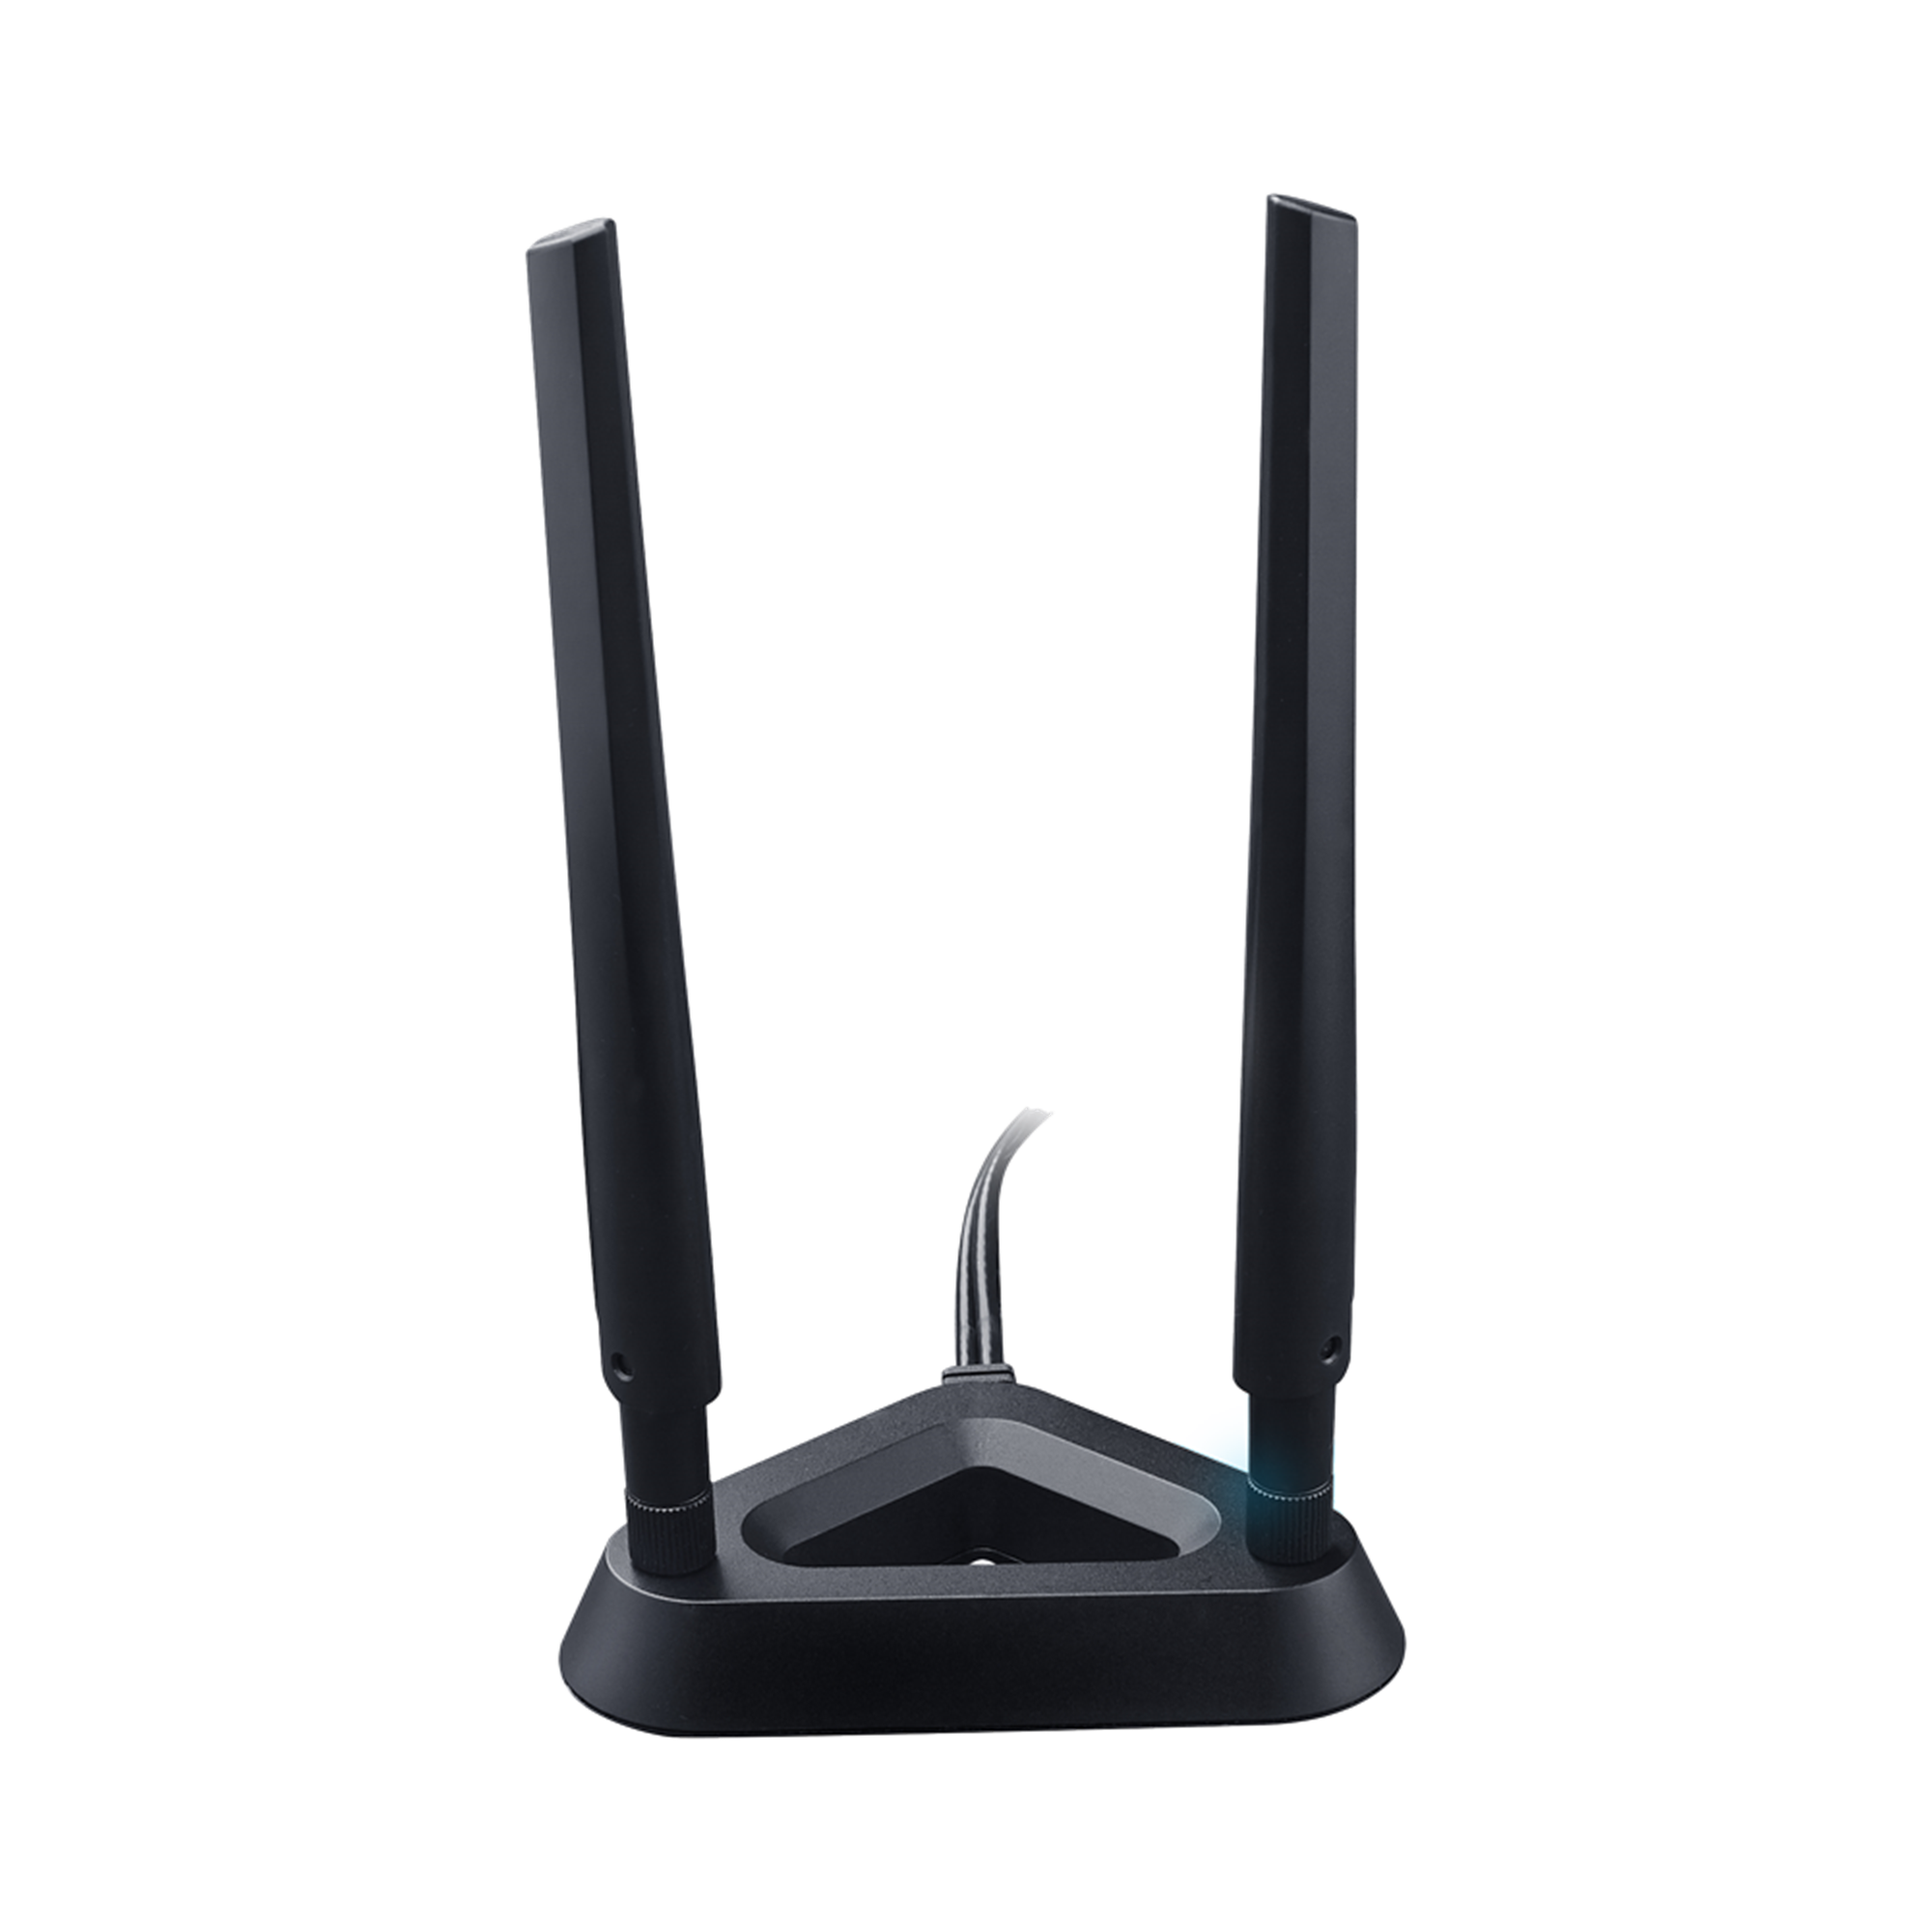 PCE-AC56｜Wireless & Wired Adapters｜ASUS USA